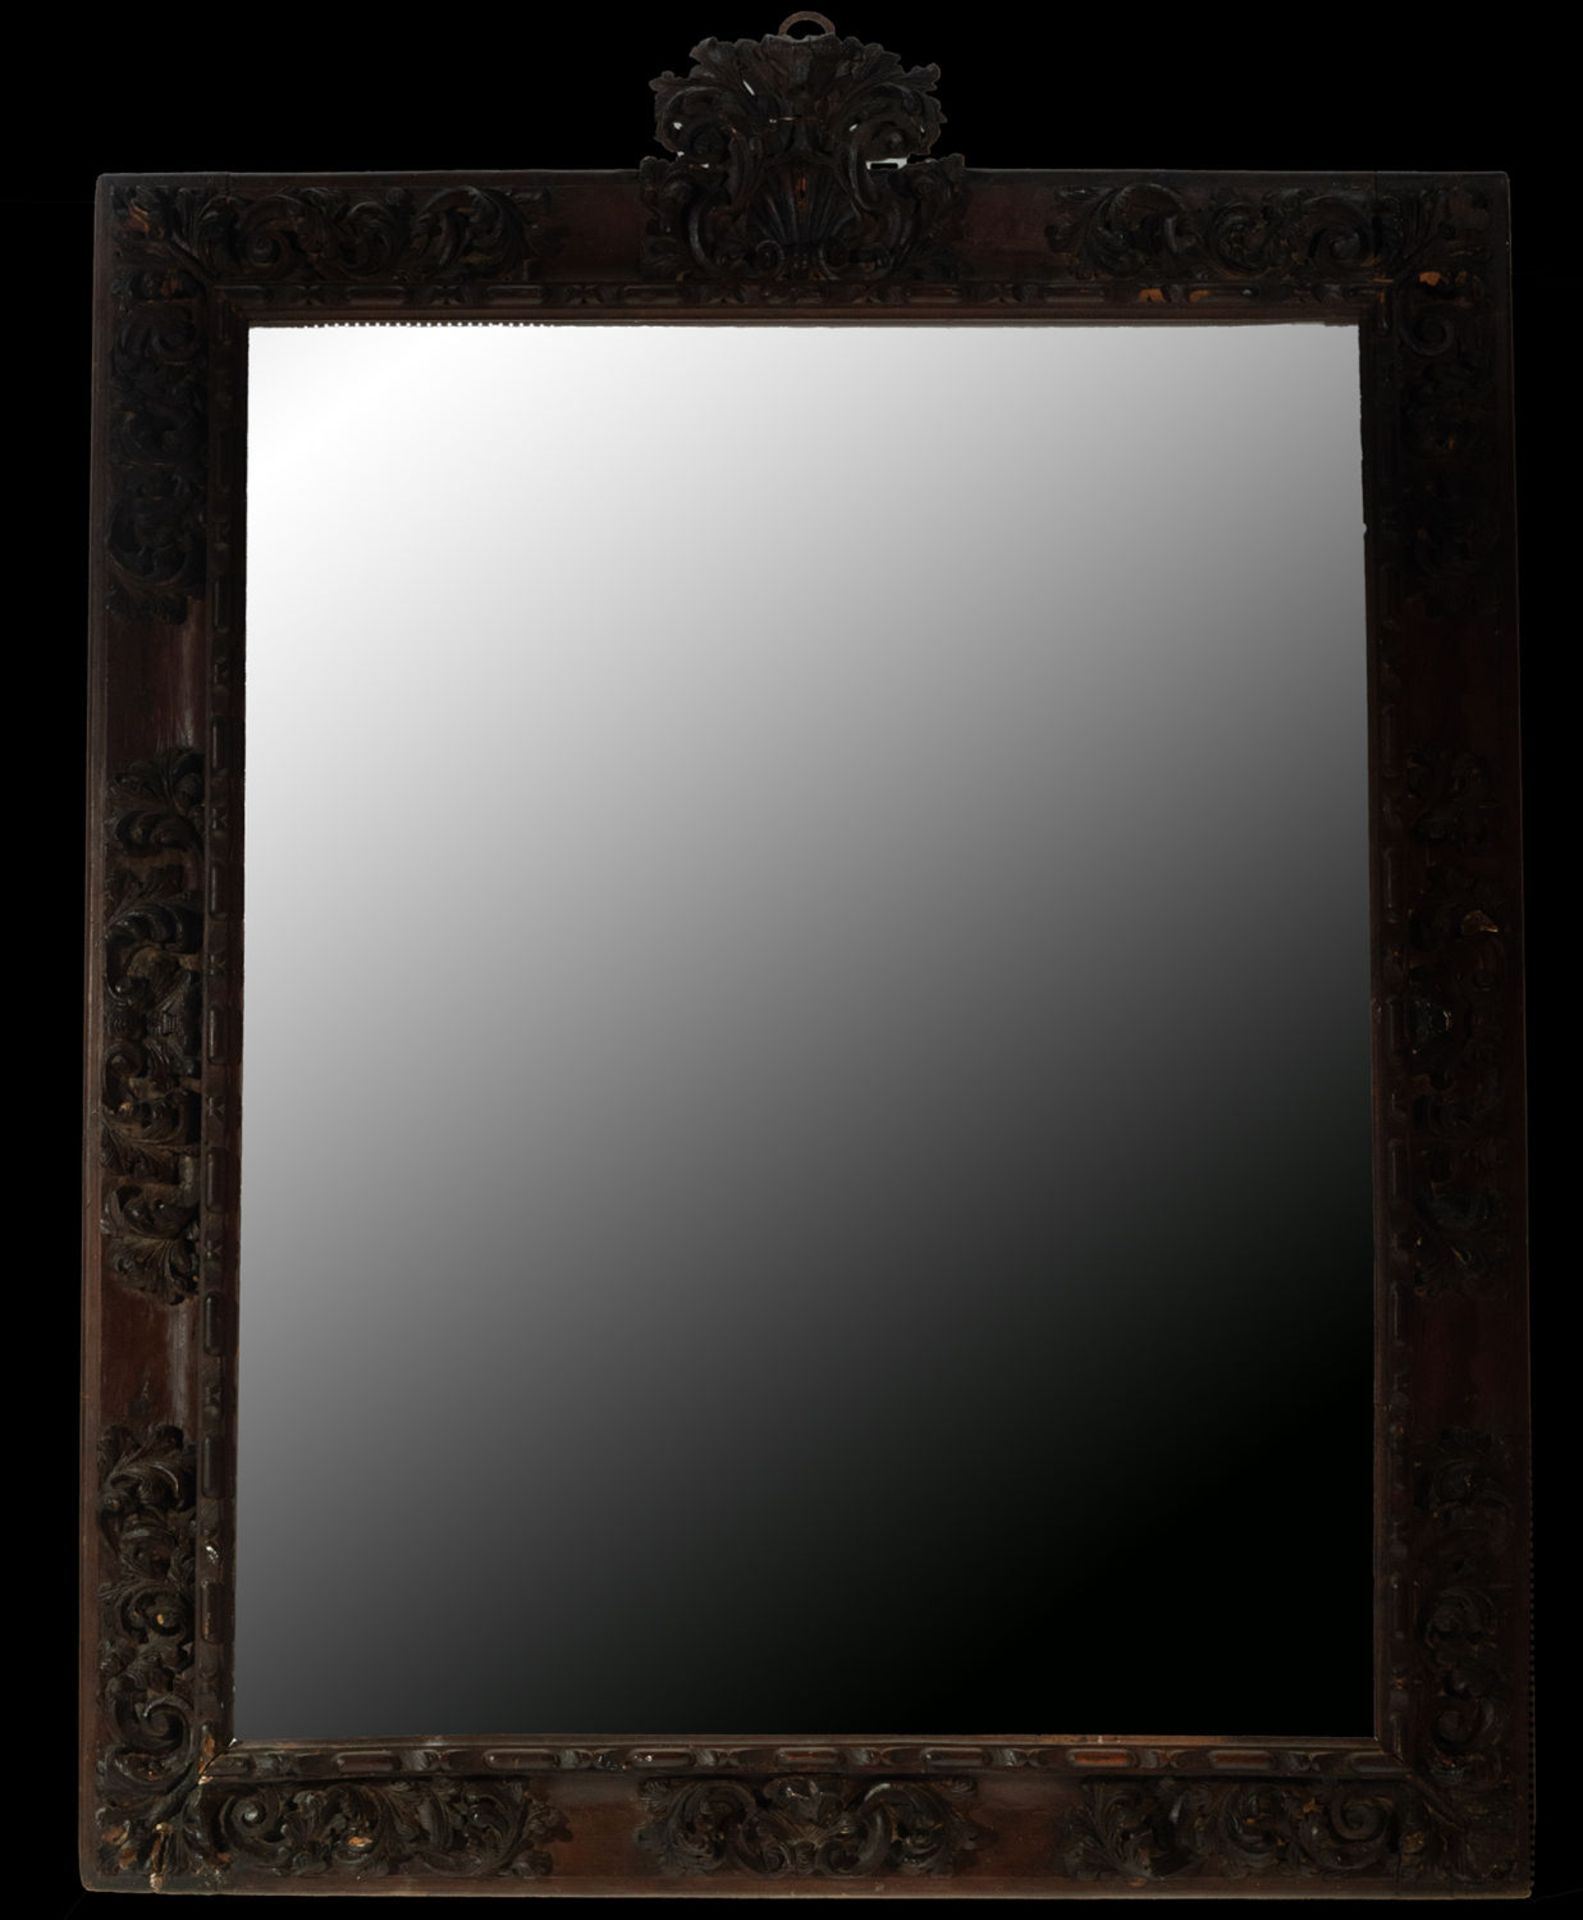 Important Spanish Baroque frame Carlos II period in melis pine wood, 18th century - Image 2 of 4